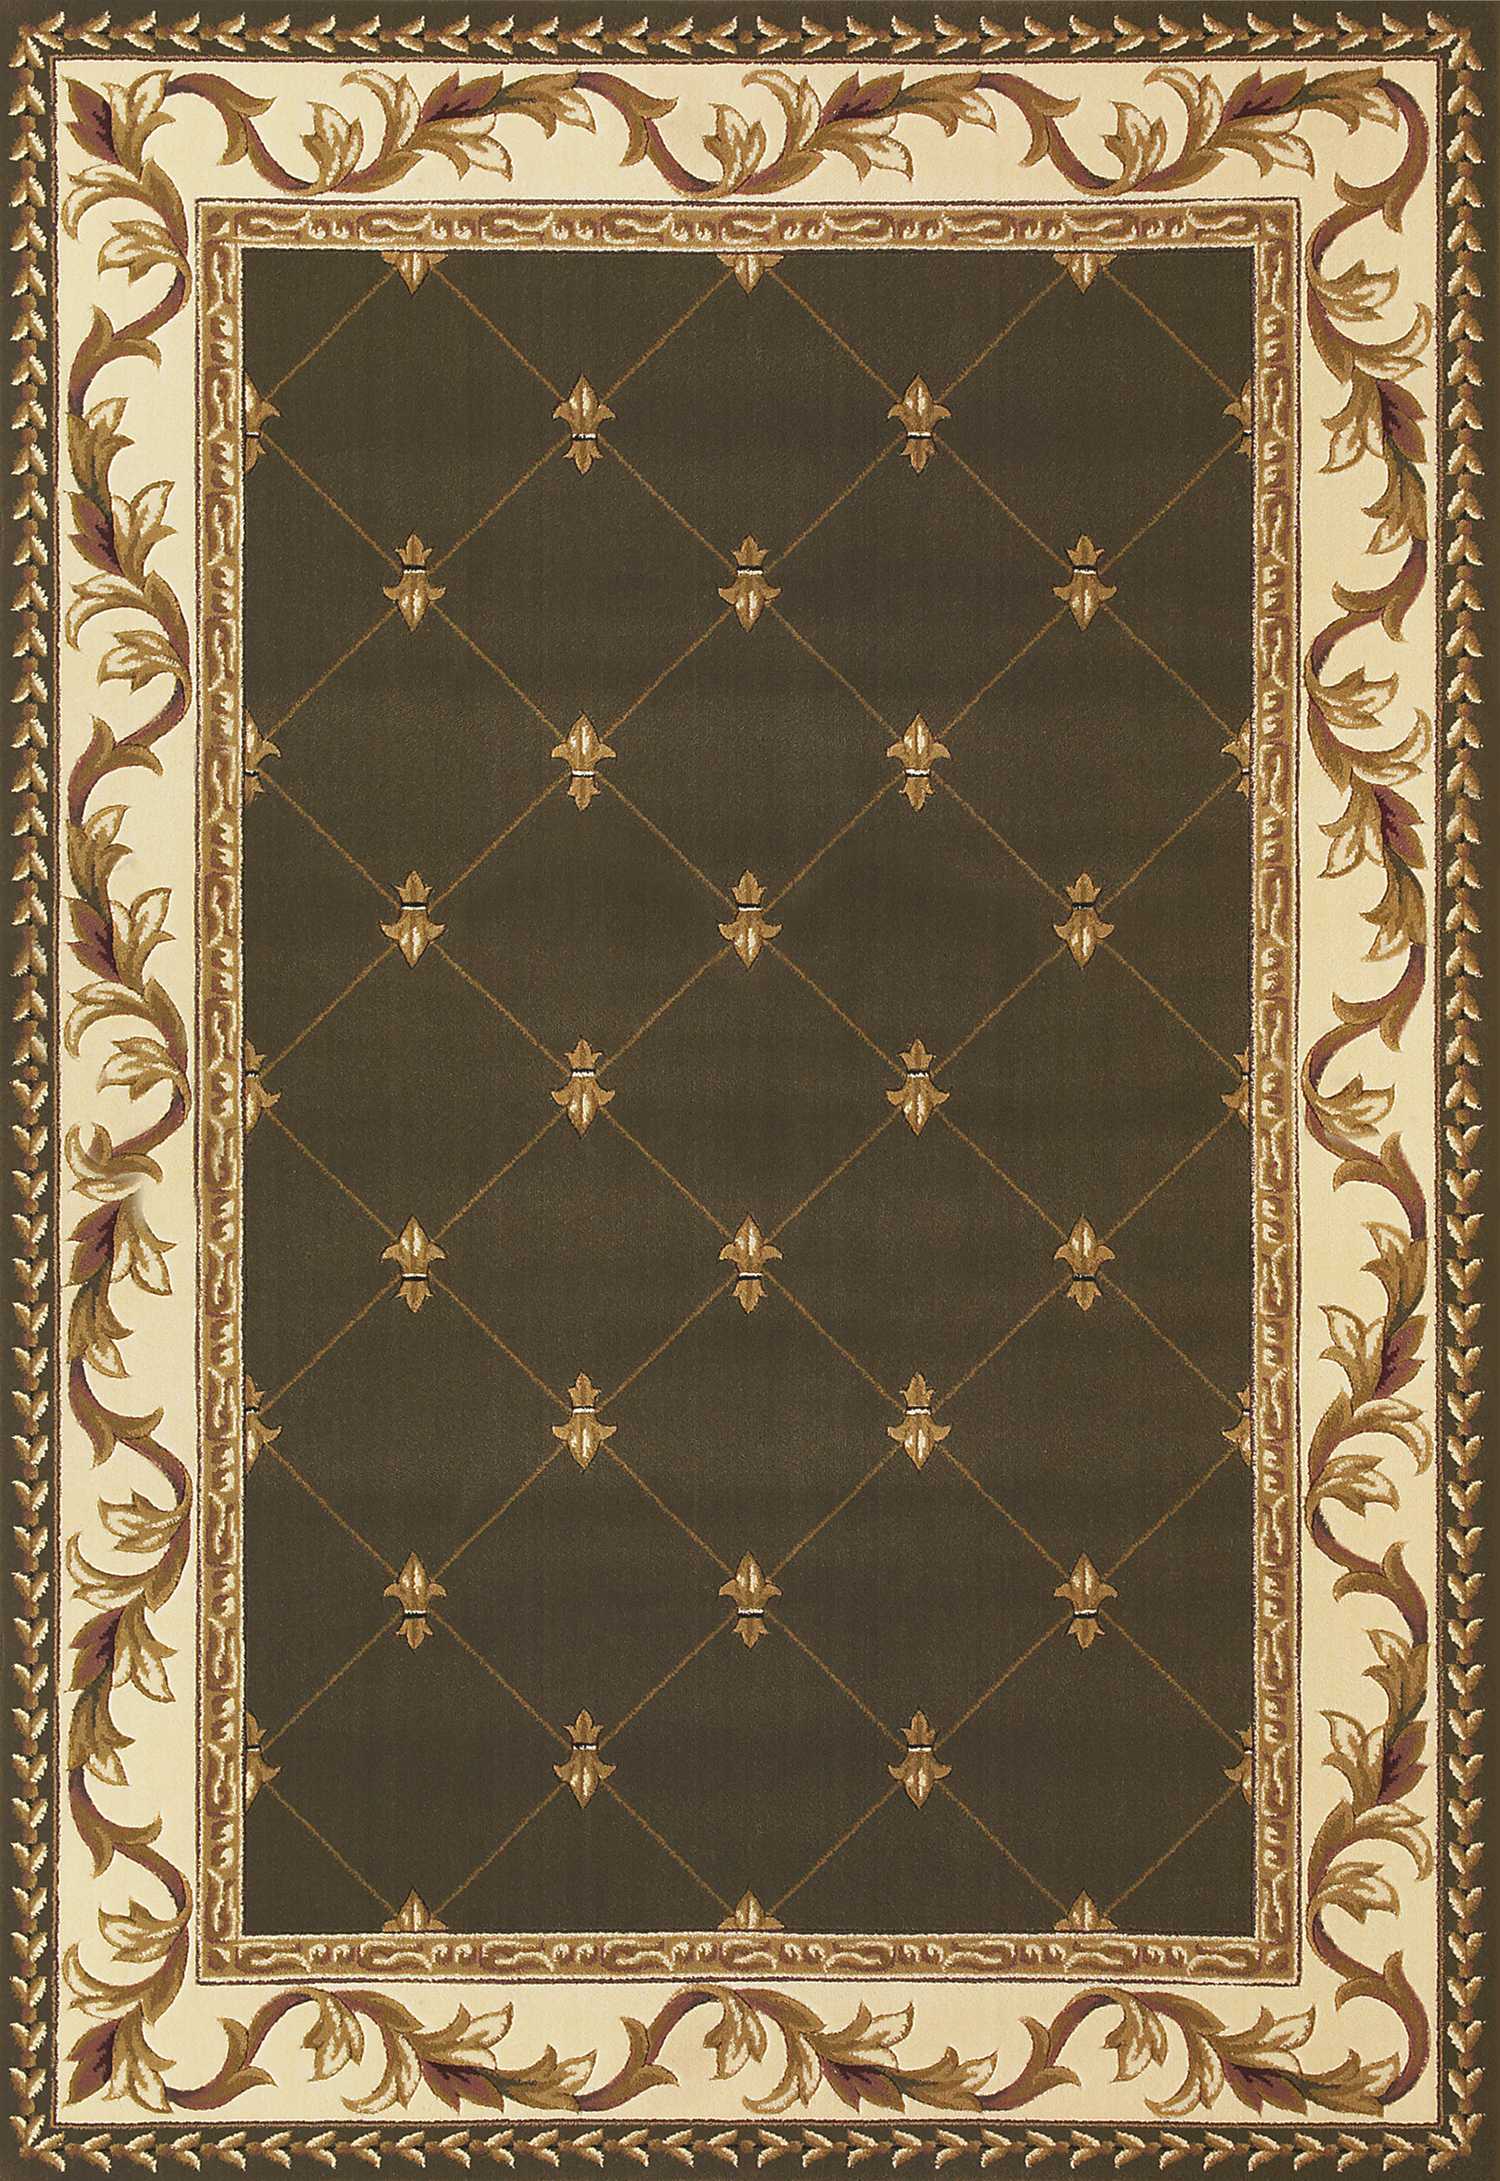 2' x 3' Green and Ivory Trellis Area Rug-353205-1